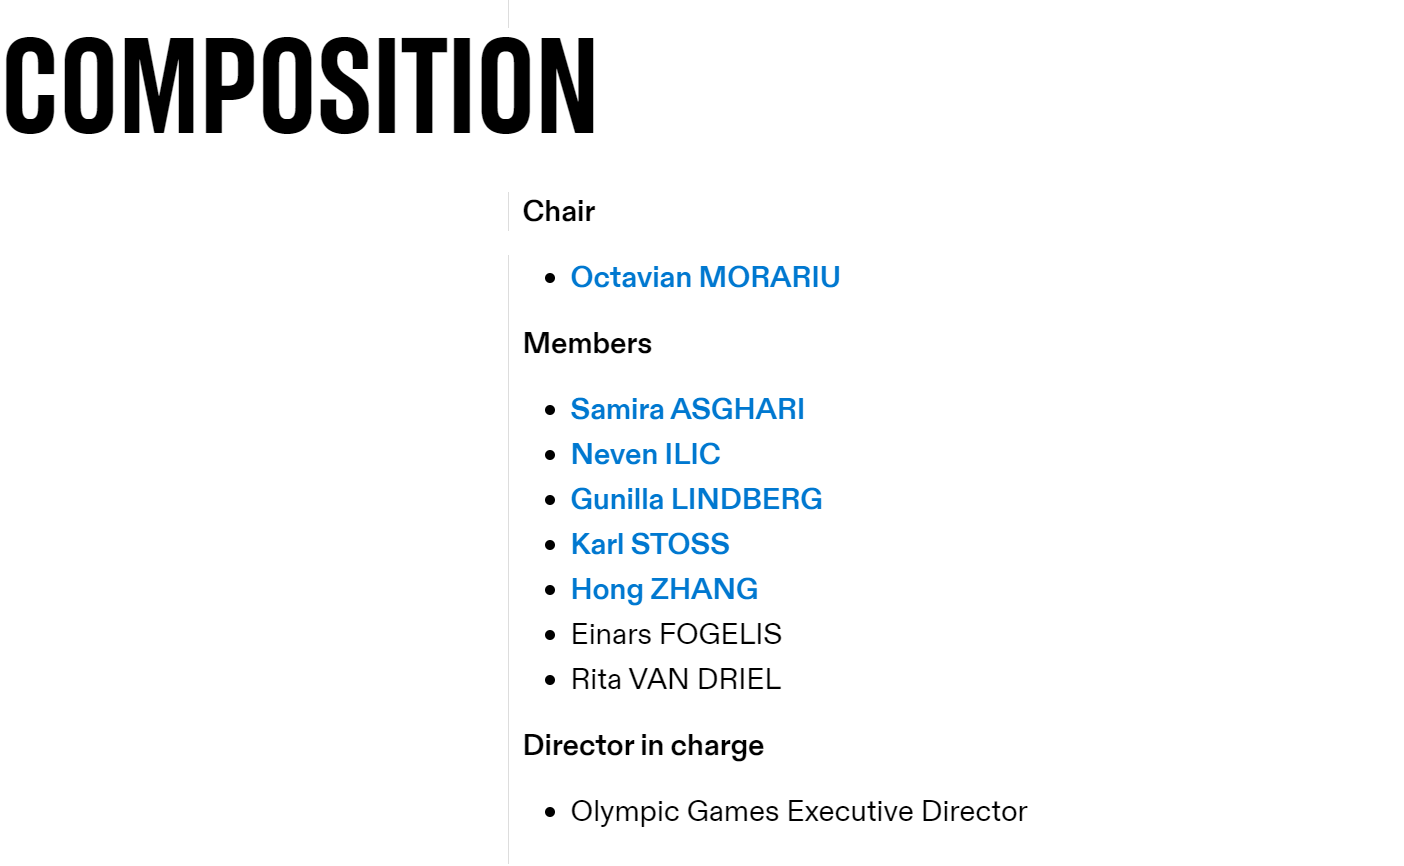 Gunilla Lindberg of Sweden has suspended her participation in the Future Host Commission for the Olympic Winter Games, but is still listed as a member ©IOC